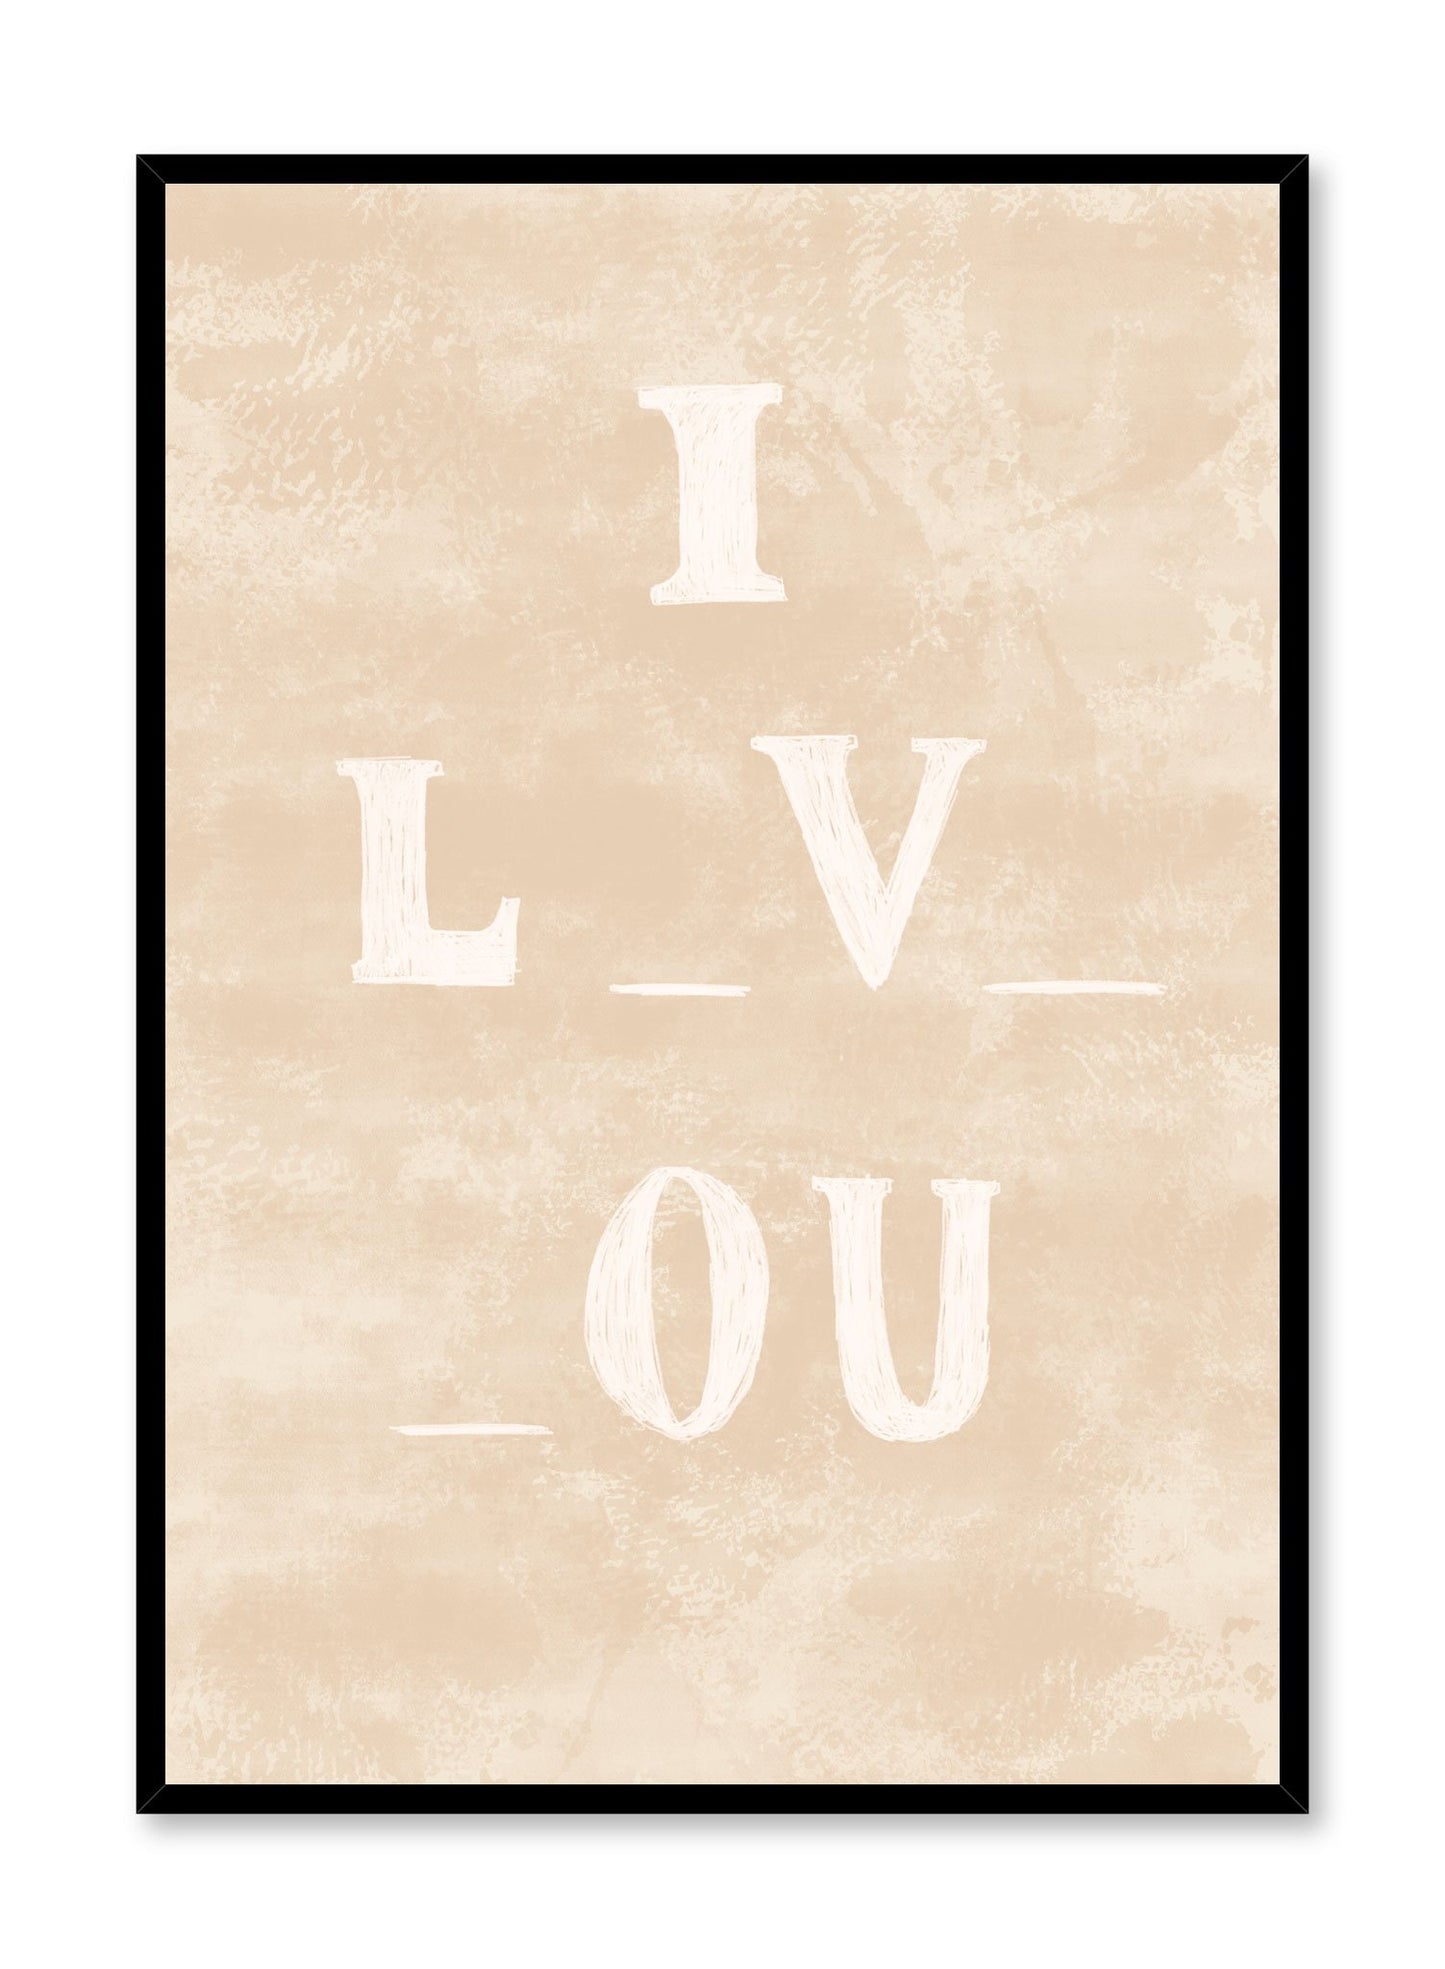 Sweet Enigma is a minimalist typography by Opposite Wall of the words "I Love You" with a few letters missing here and there.